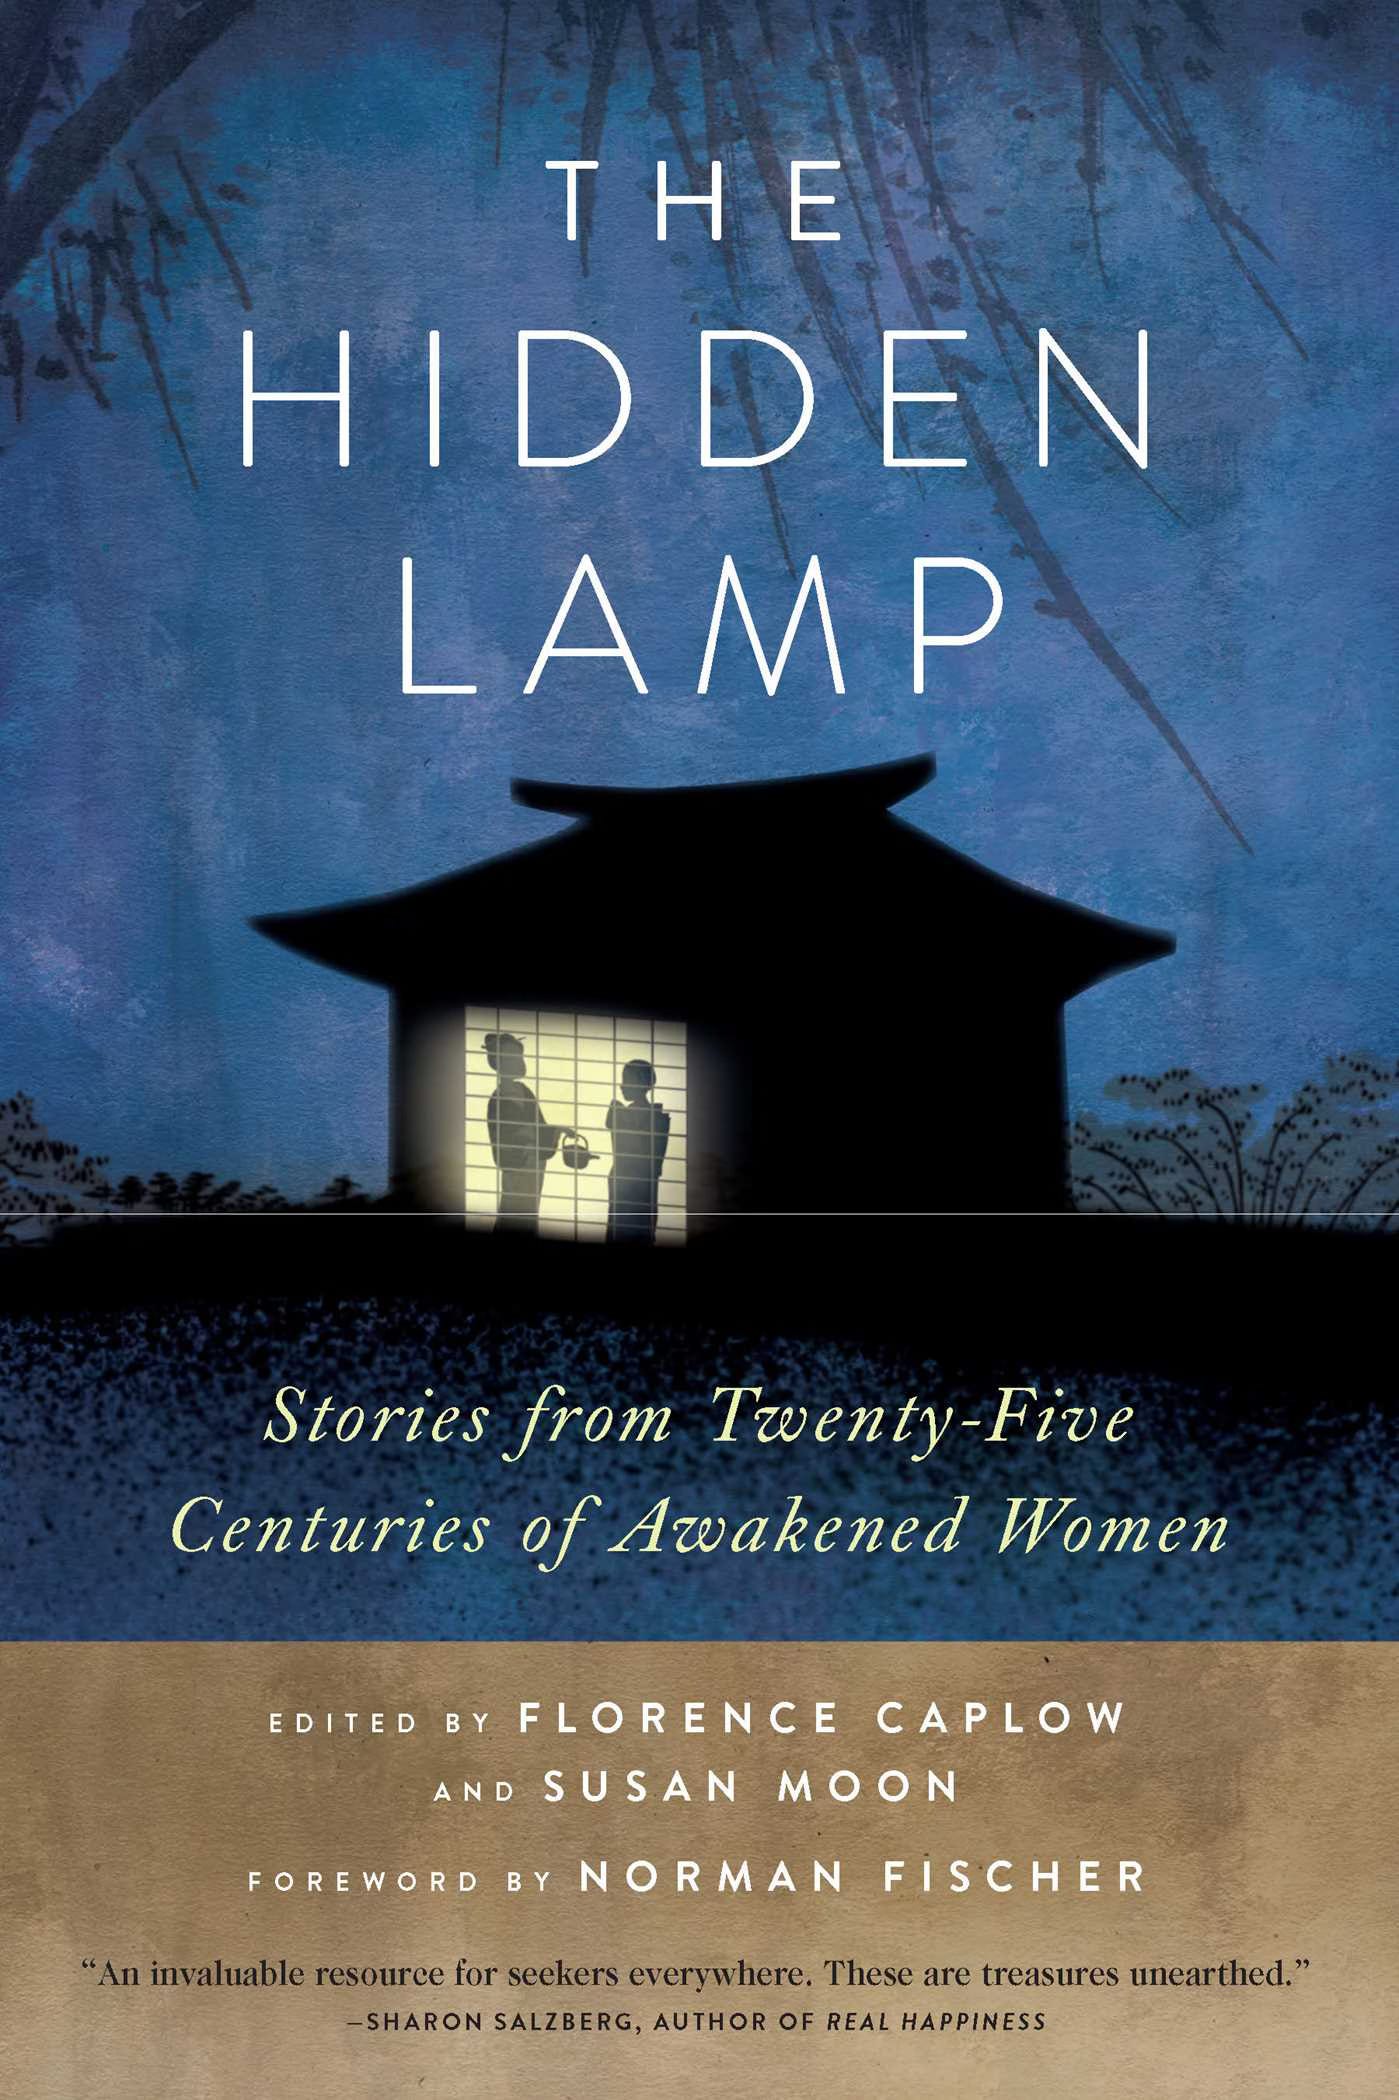 Front cover of The Hidden Lamp; Stories from Twenty-Five Centuries of Awakened Women, edited by Florence Caplow and Susan Moon, foreword by Norman Fischer. The cover is a deep night-time blue with the silhouette of a small Chinese-style house. Behind a lit shoji-screen window are the the small figures of two women in robes, one holding a tea pot. The bottom section of the cover is earth-brown, and includes the quote: “An invaluable resource for seekers everywhere. These are treasures unearthed.” — Sharon Salzberg, Author of “Real Happiness.”